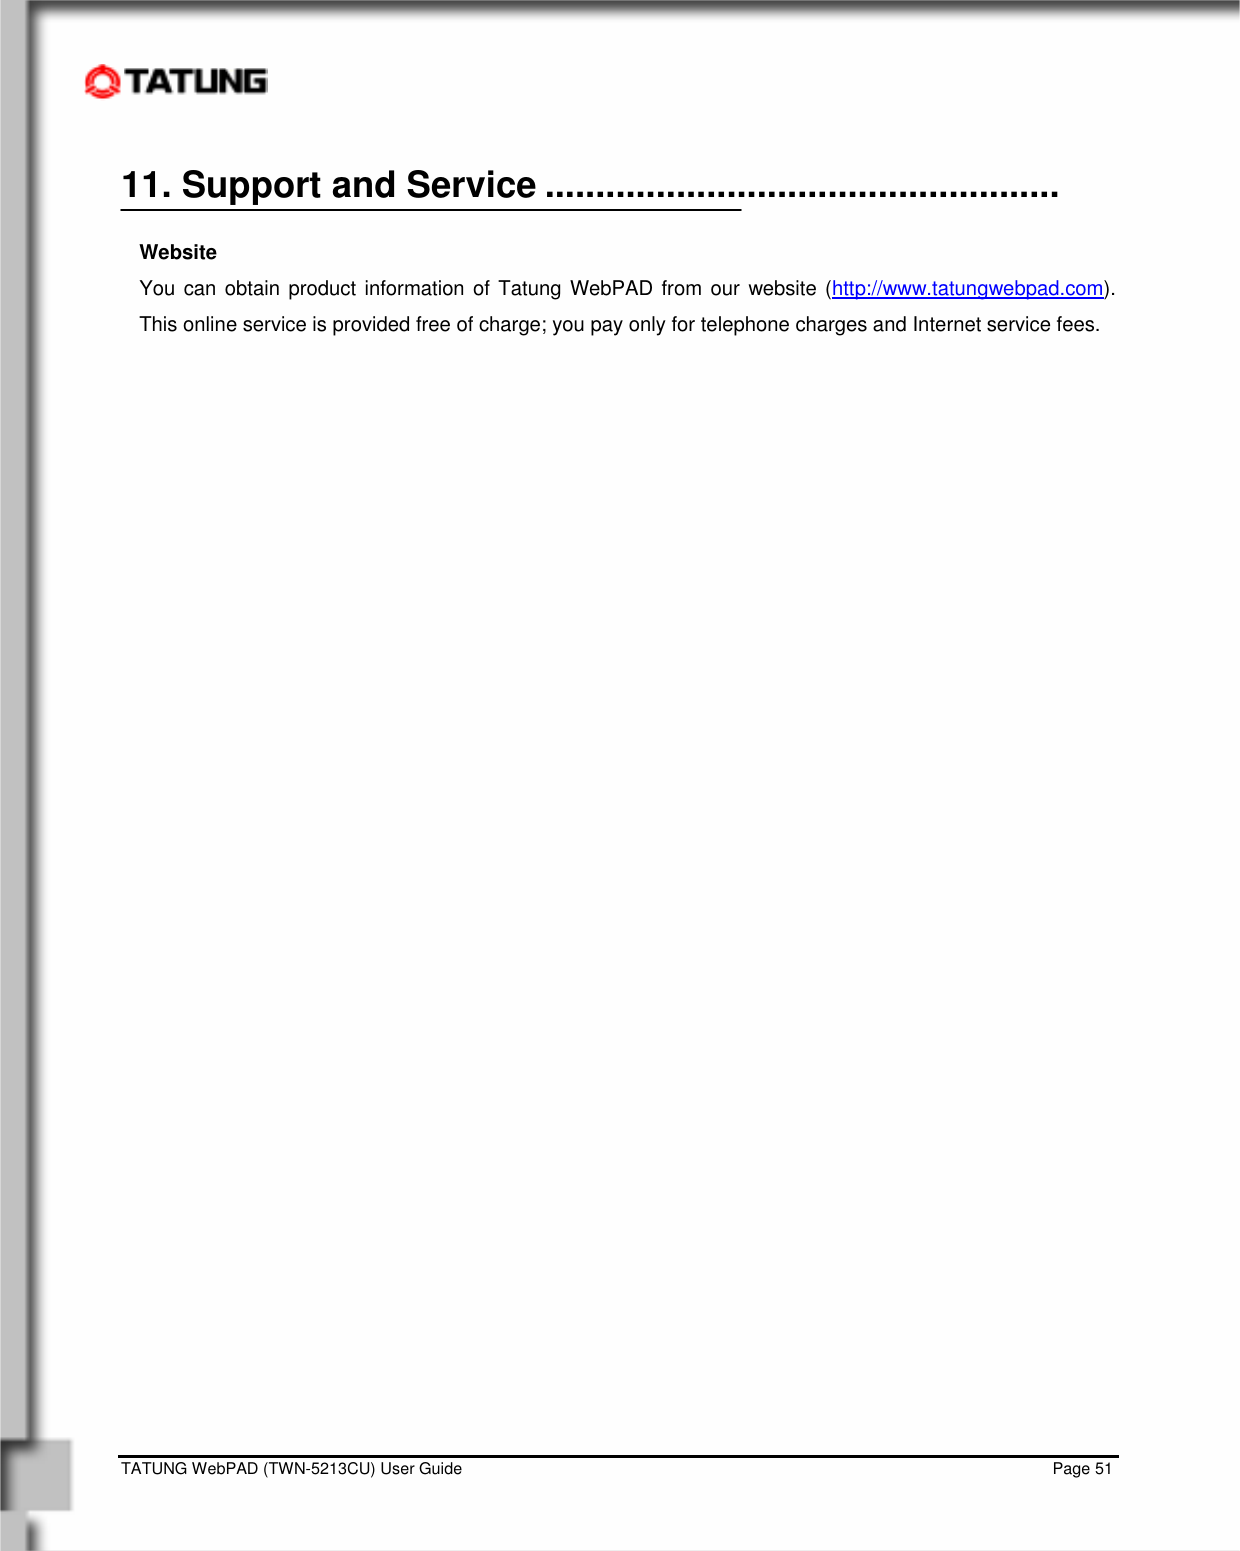    TATUNG WebPAD (TWN-5213CU) User Guide                                                                                                                                   Page 51 11. Support and Service ...................................................  Website You can obtain product information of Tatung WebPAD from our website (http://www.tatungwebpad.com).  This online service is provided free of charge; you pay only for telephone charges and Internet service fees.                           